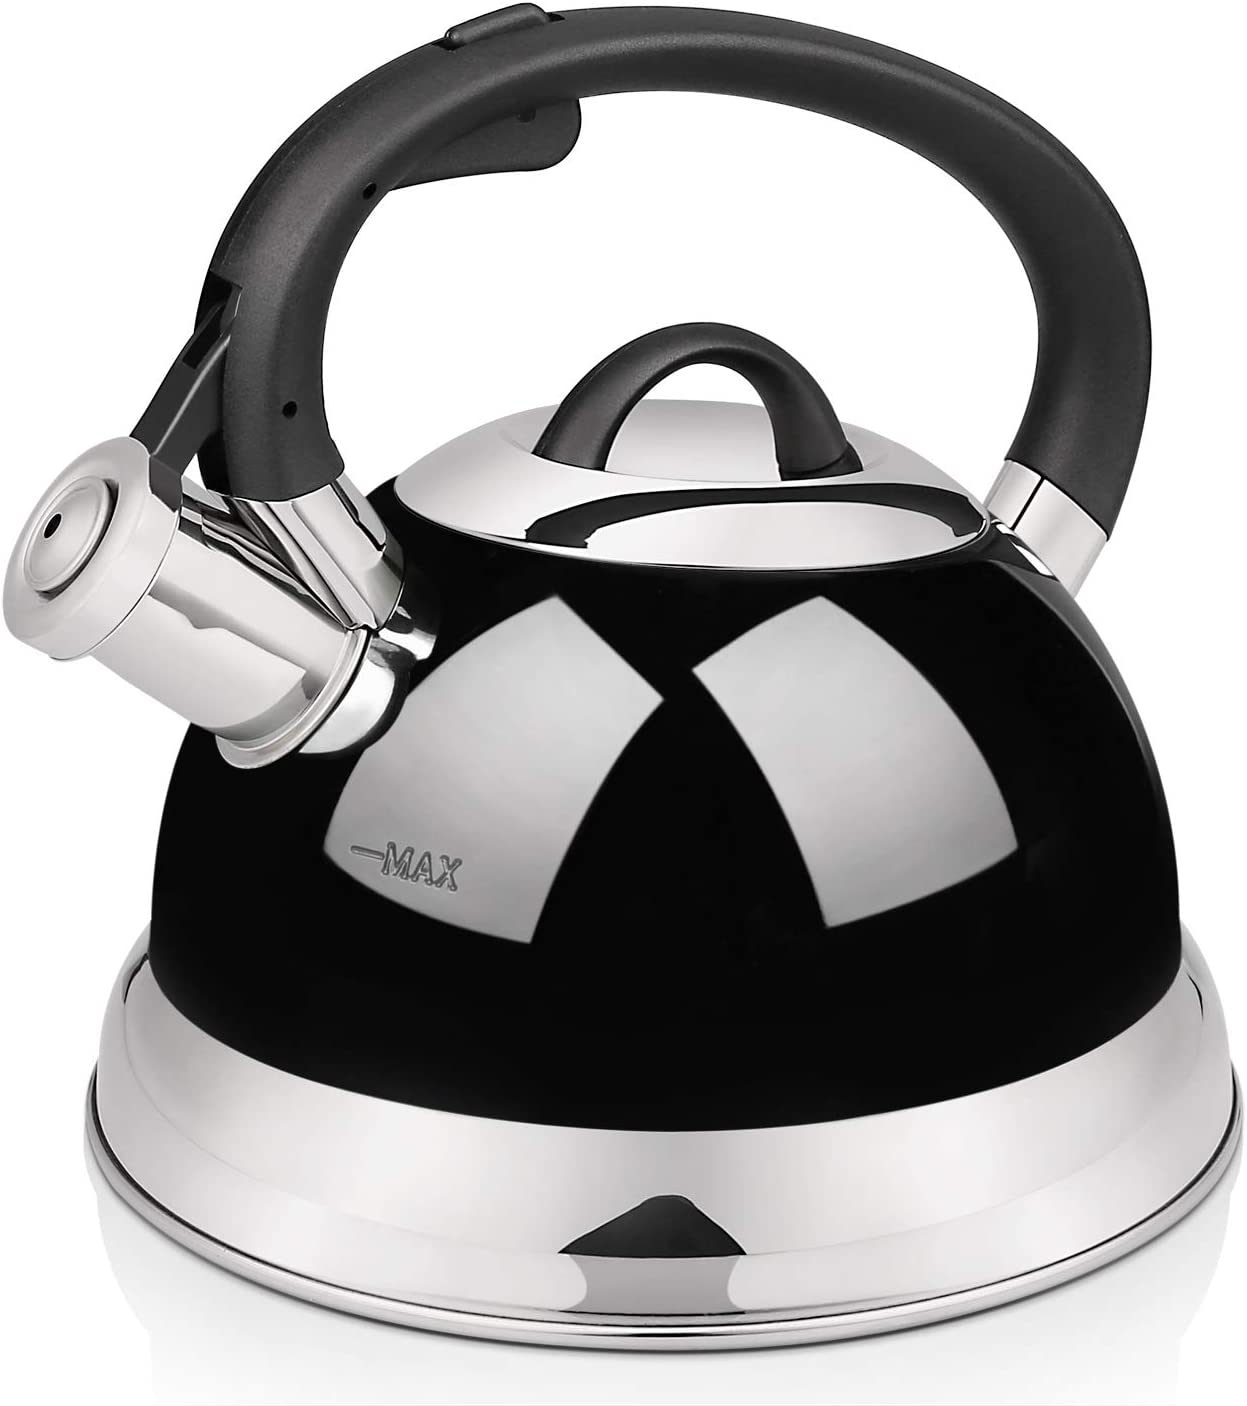 VICALINA Tea Kettle -  - Stainless Steel Teapot with One-Touch Switch Button